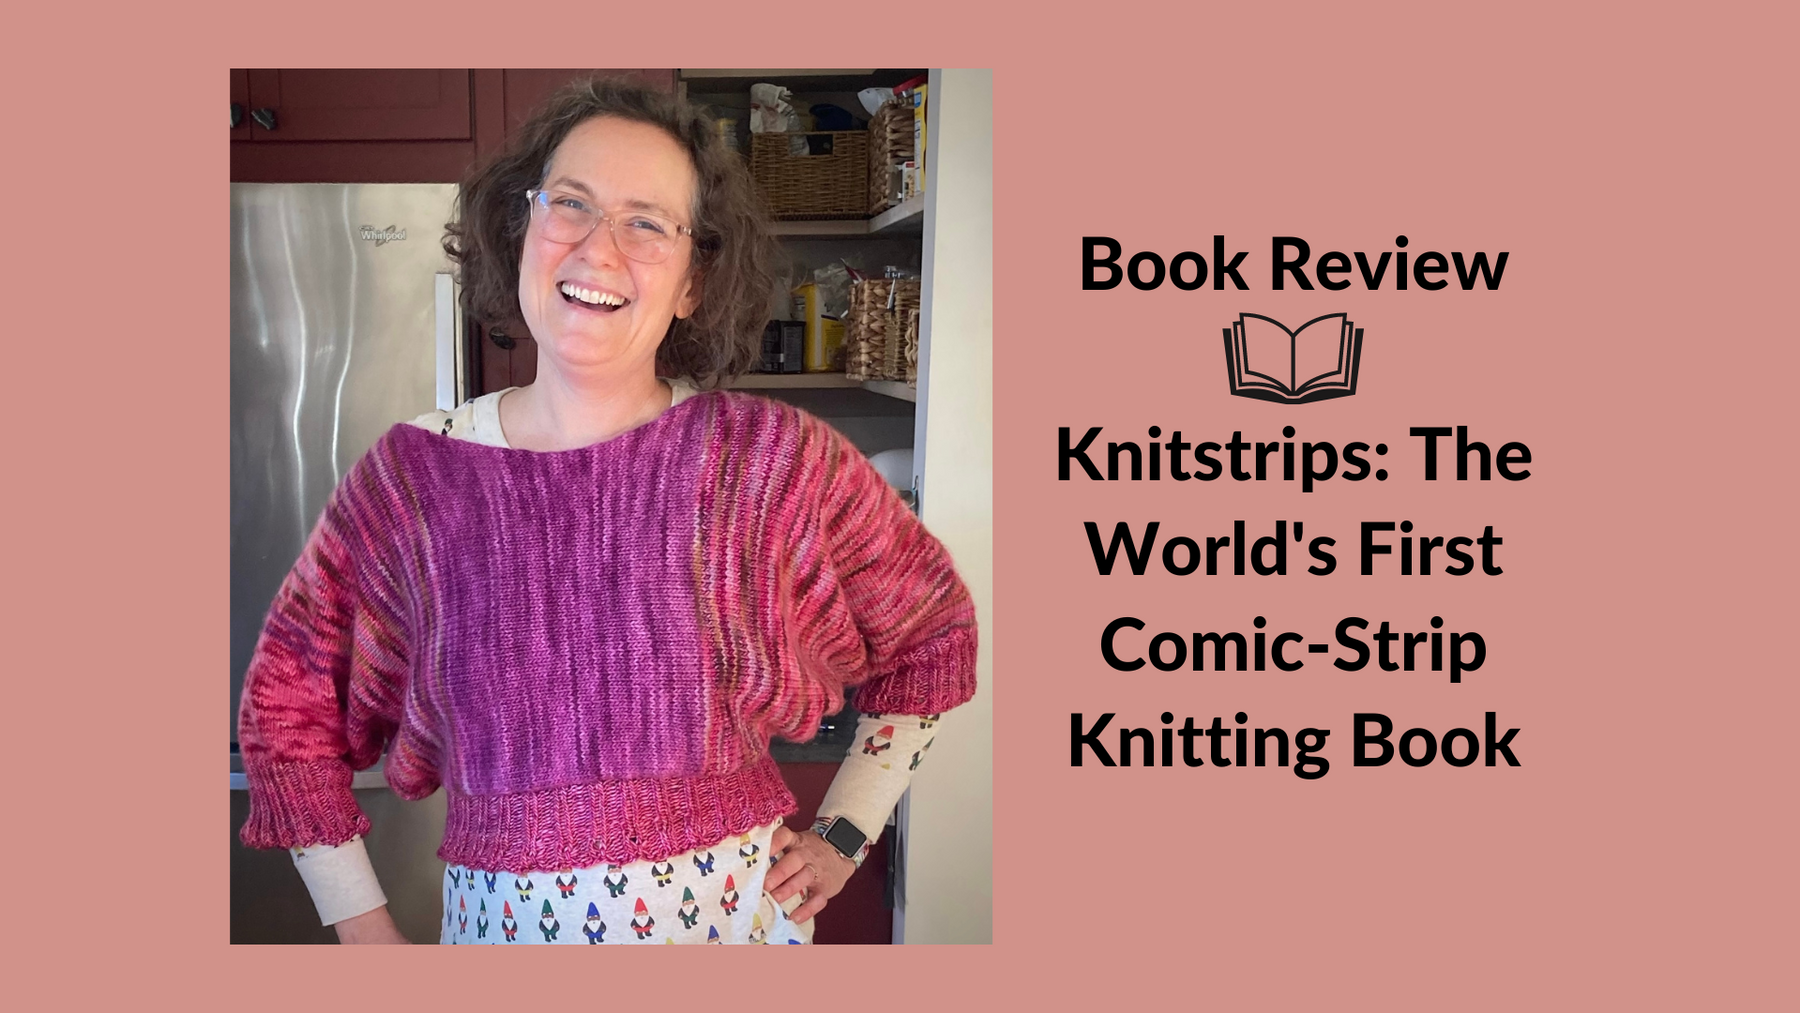 Book Review: Knitstrips: The World's First Comic-Strip Knitting Book